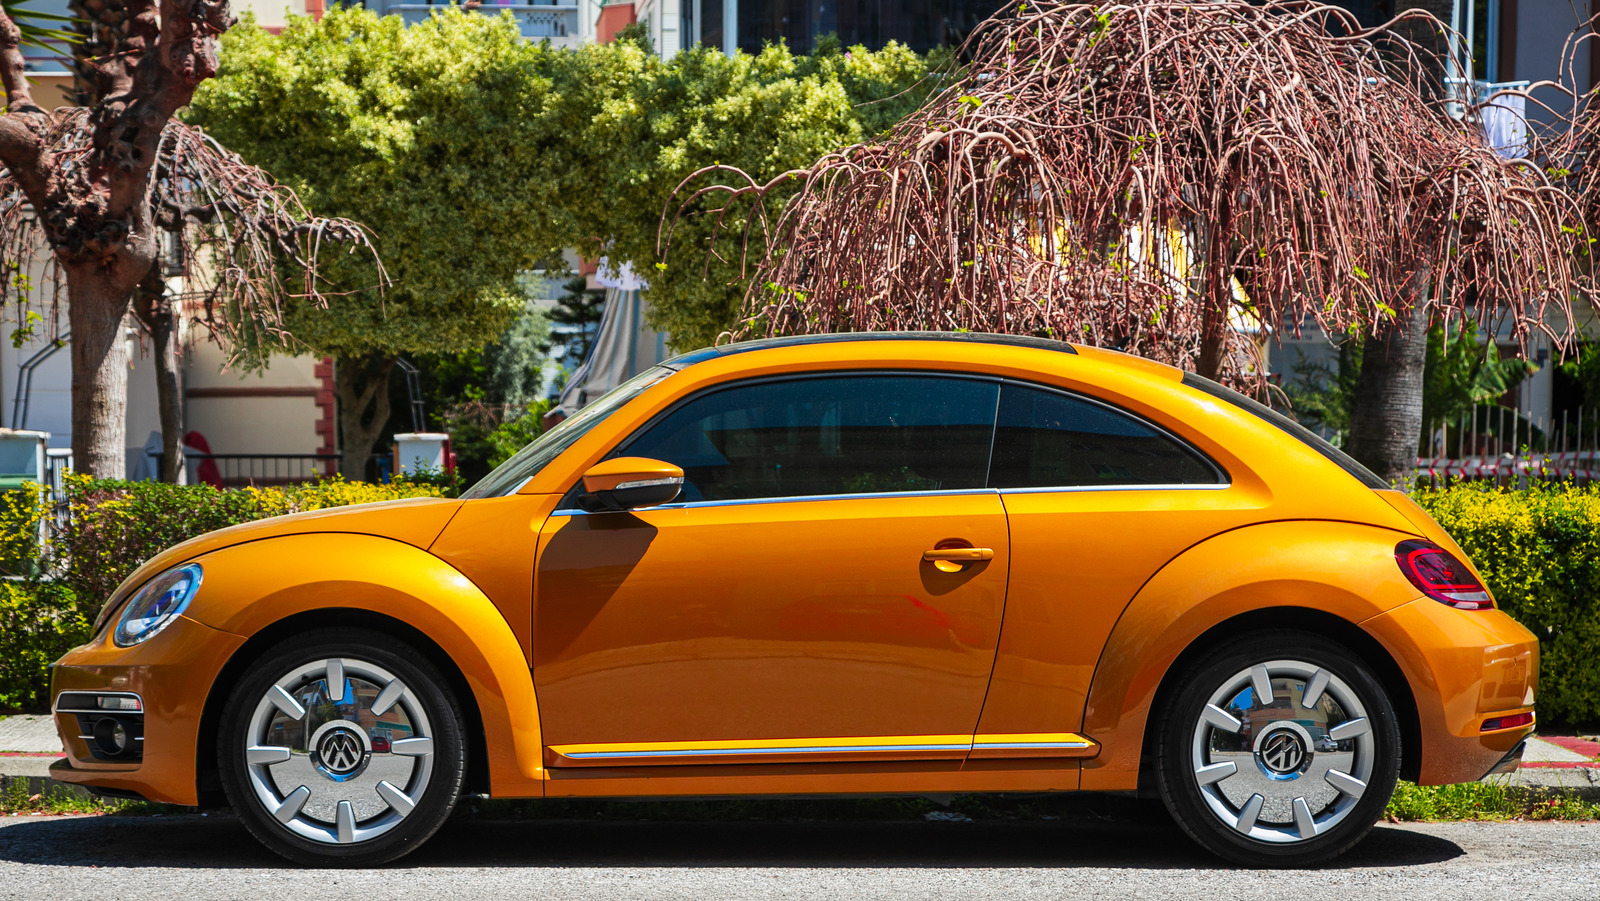 https://www.slashgear.com/img/gallery/the-reason-why-volkswagen-discontinued-the-beetle/l-intro-1661108309.jpg